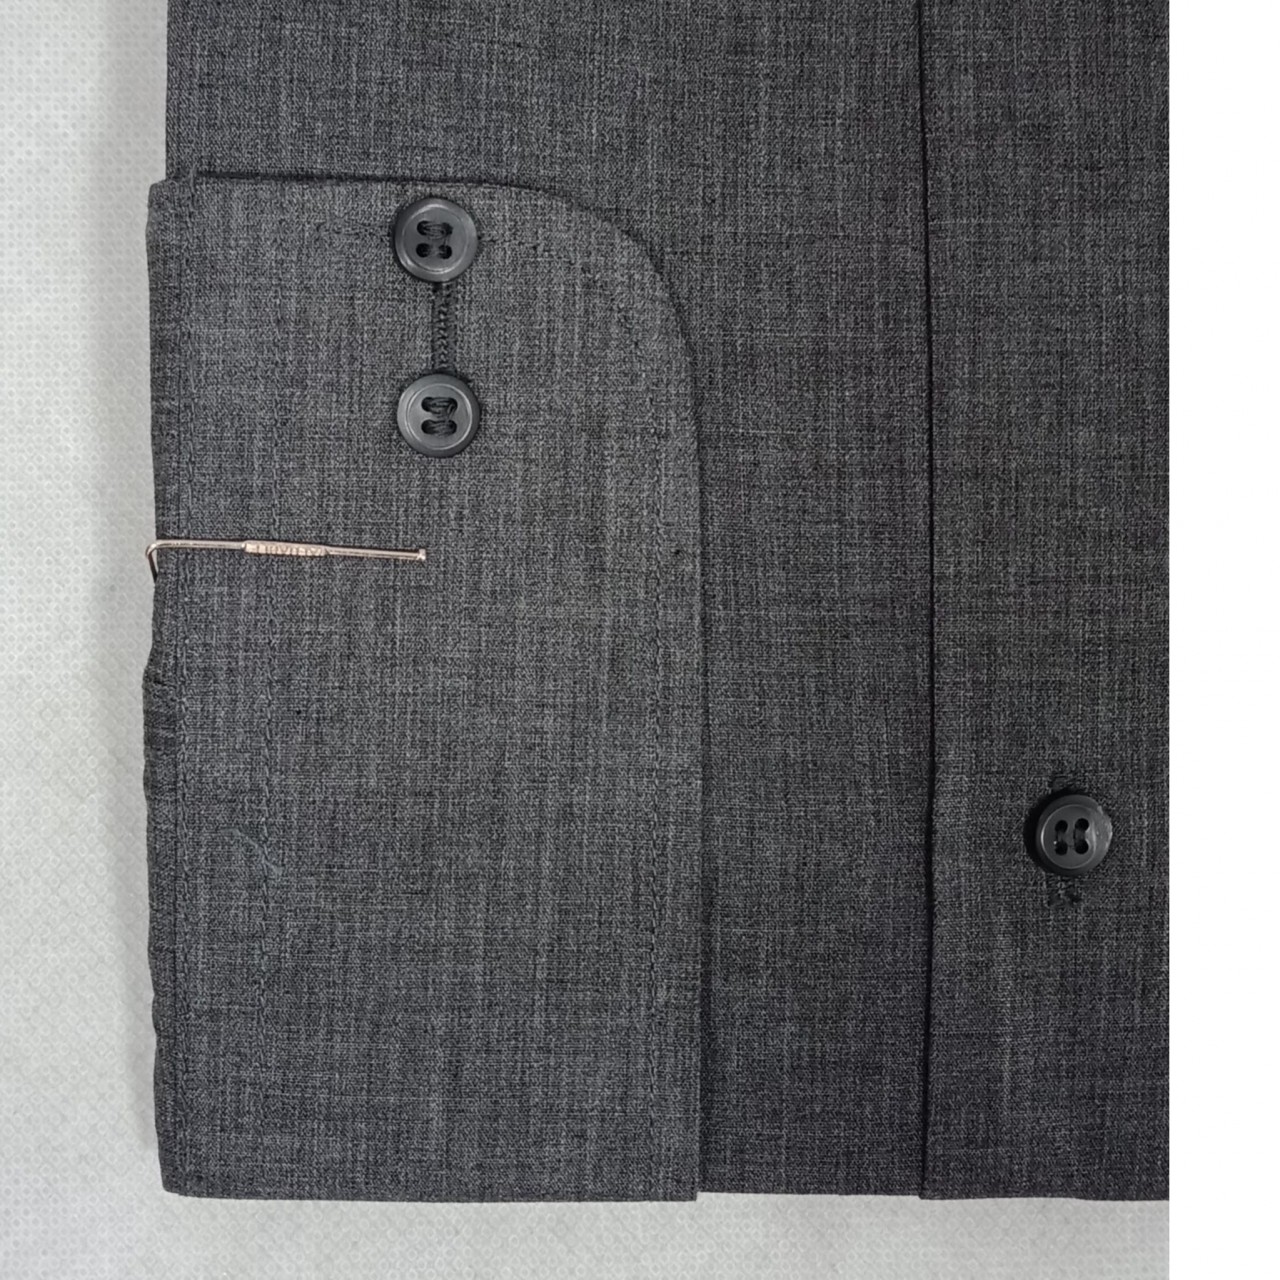 Chambray Formal Shirt For Men - Double Needle Stitching - Dark Grey